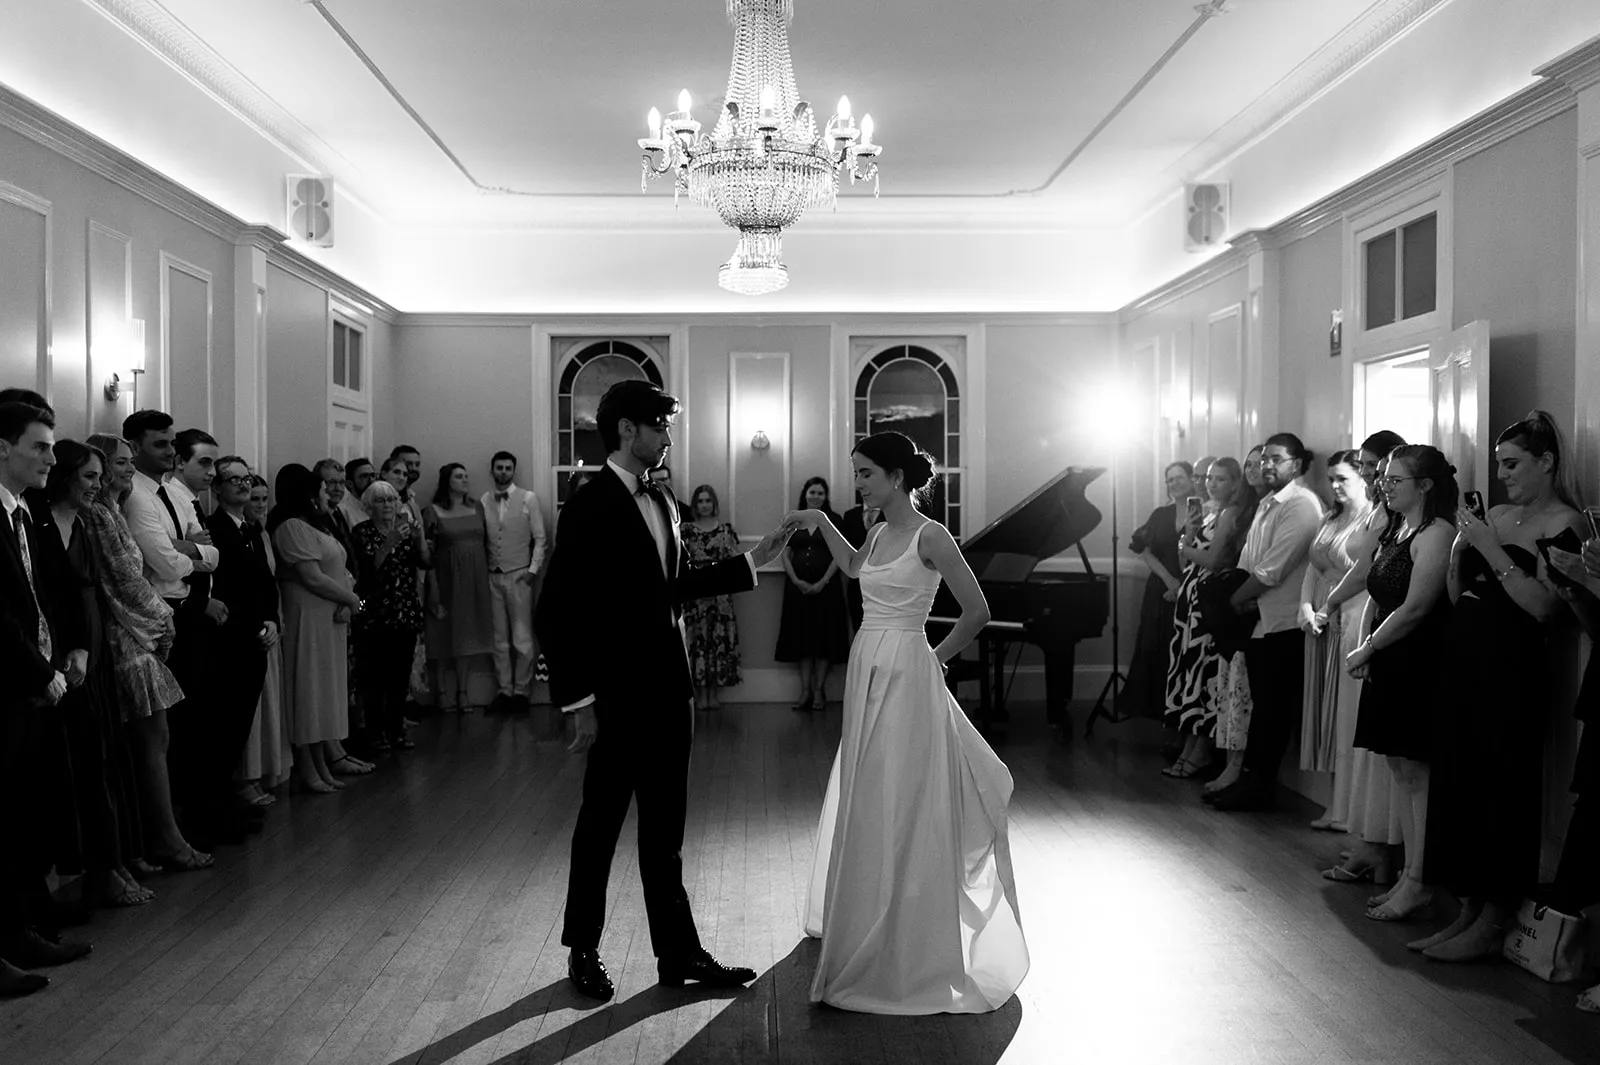 A black-and-white photo capturing a couple's first dance at their wedding. They are dressed in formal attire, with the bride in a strapless gown and the groom in a suit. They are surrounded by guests watching and standing in a spacious room with a chandelier and a grand piano.